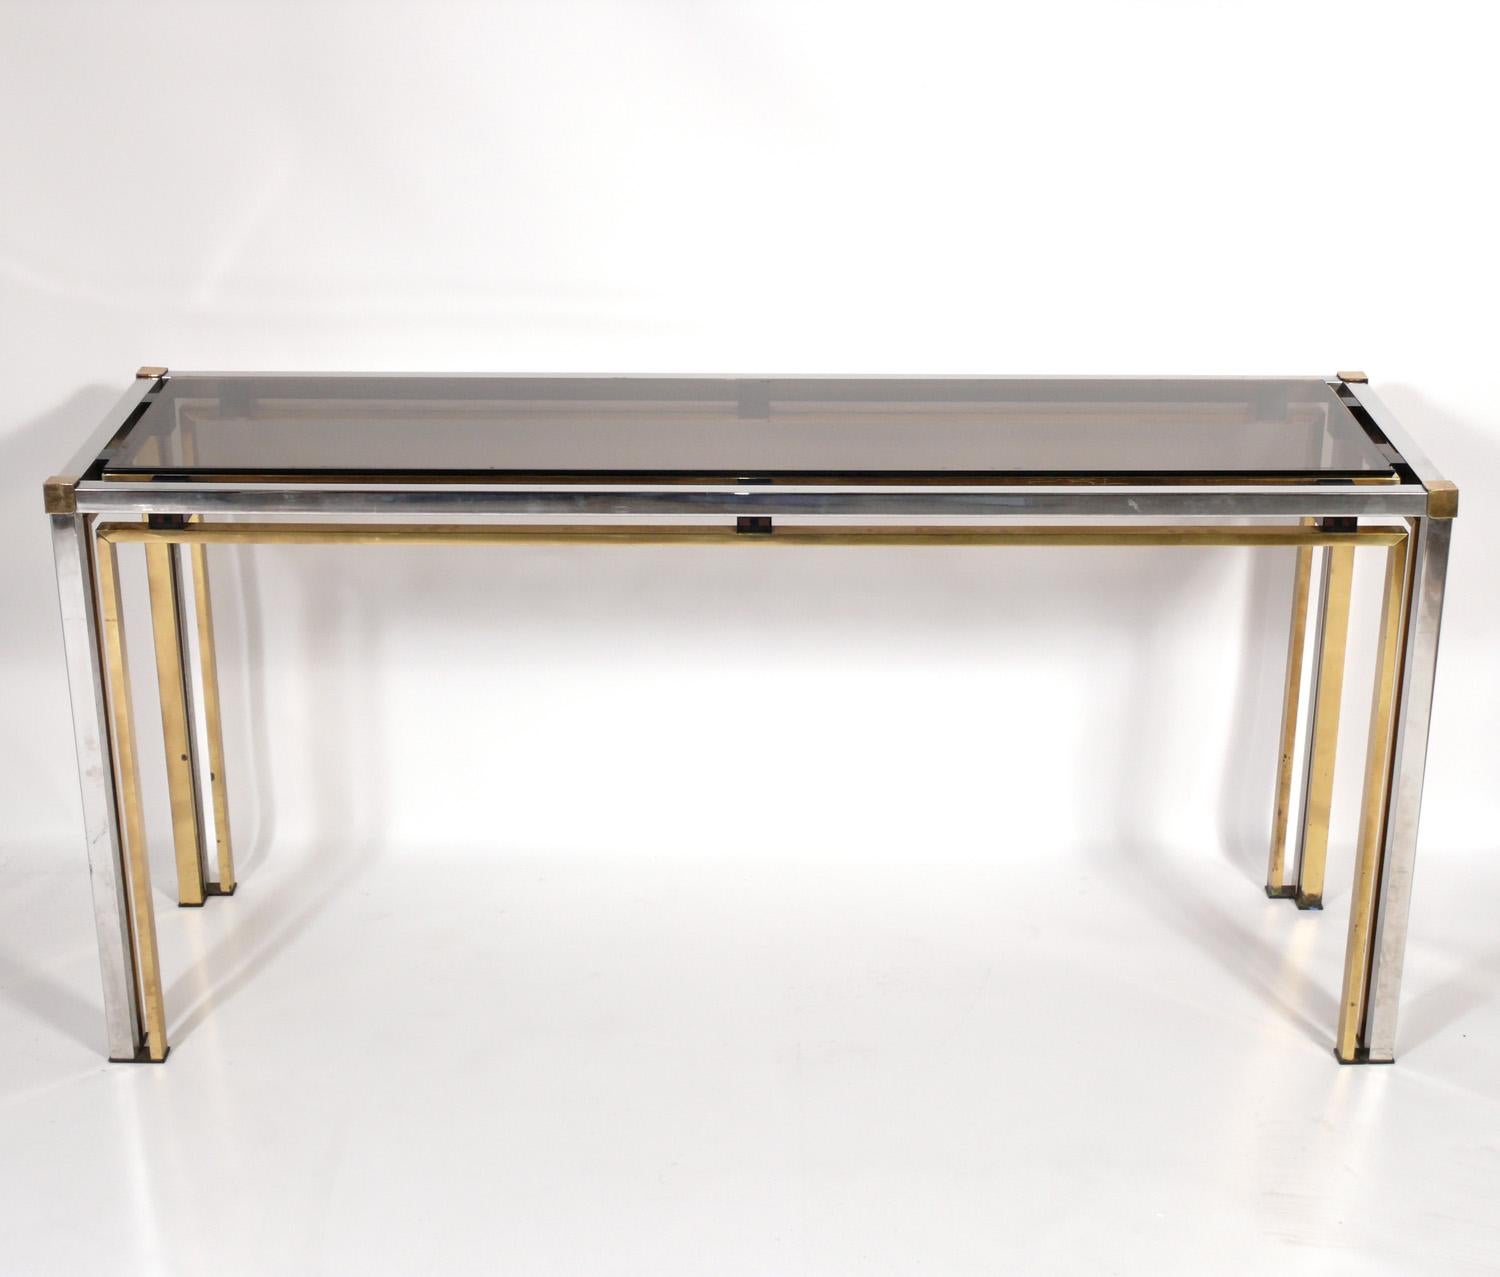 Clean Lined Modern Italian Brass and Chrome Console or sofa table, in the manner or Romeo Rega, Italy, circa 1970s. This table is a versatile size and can be used as a console table, sofa table, desk, or vanity.